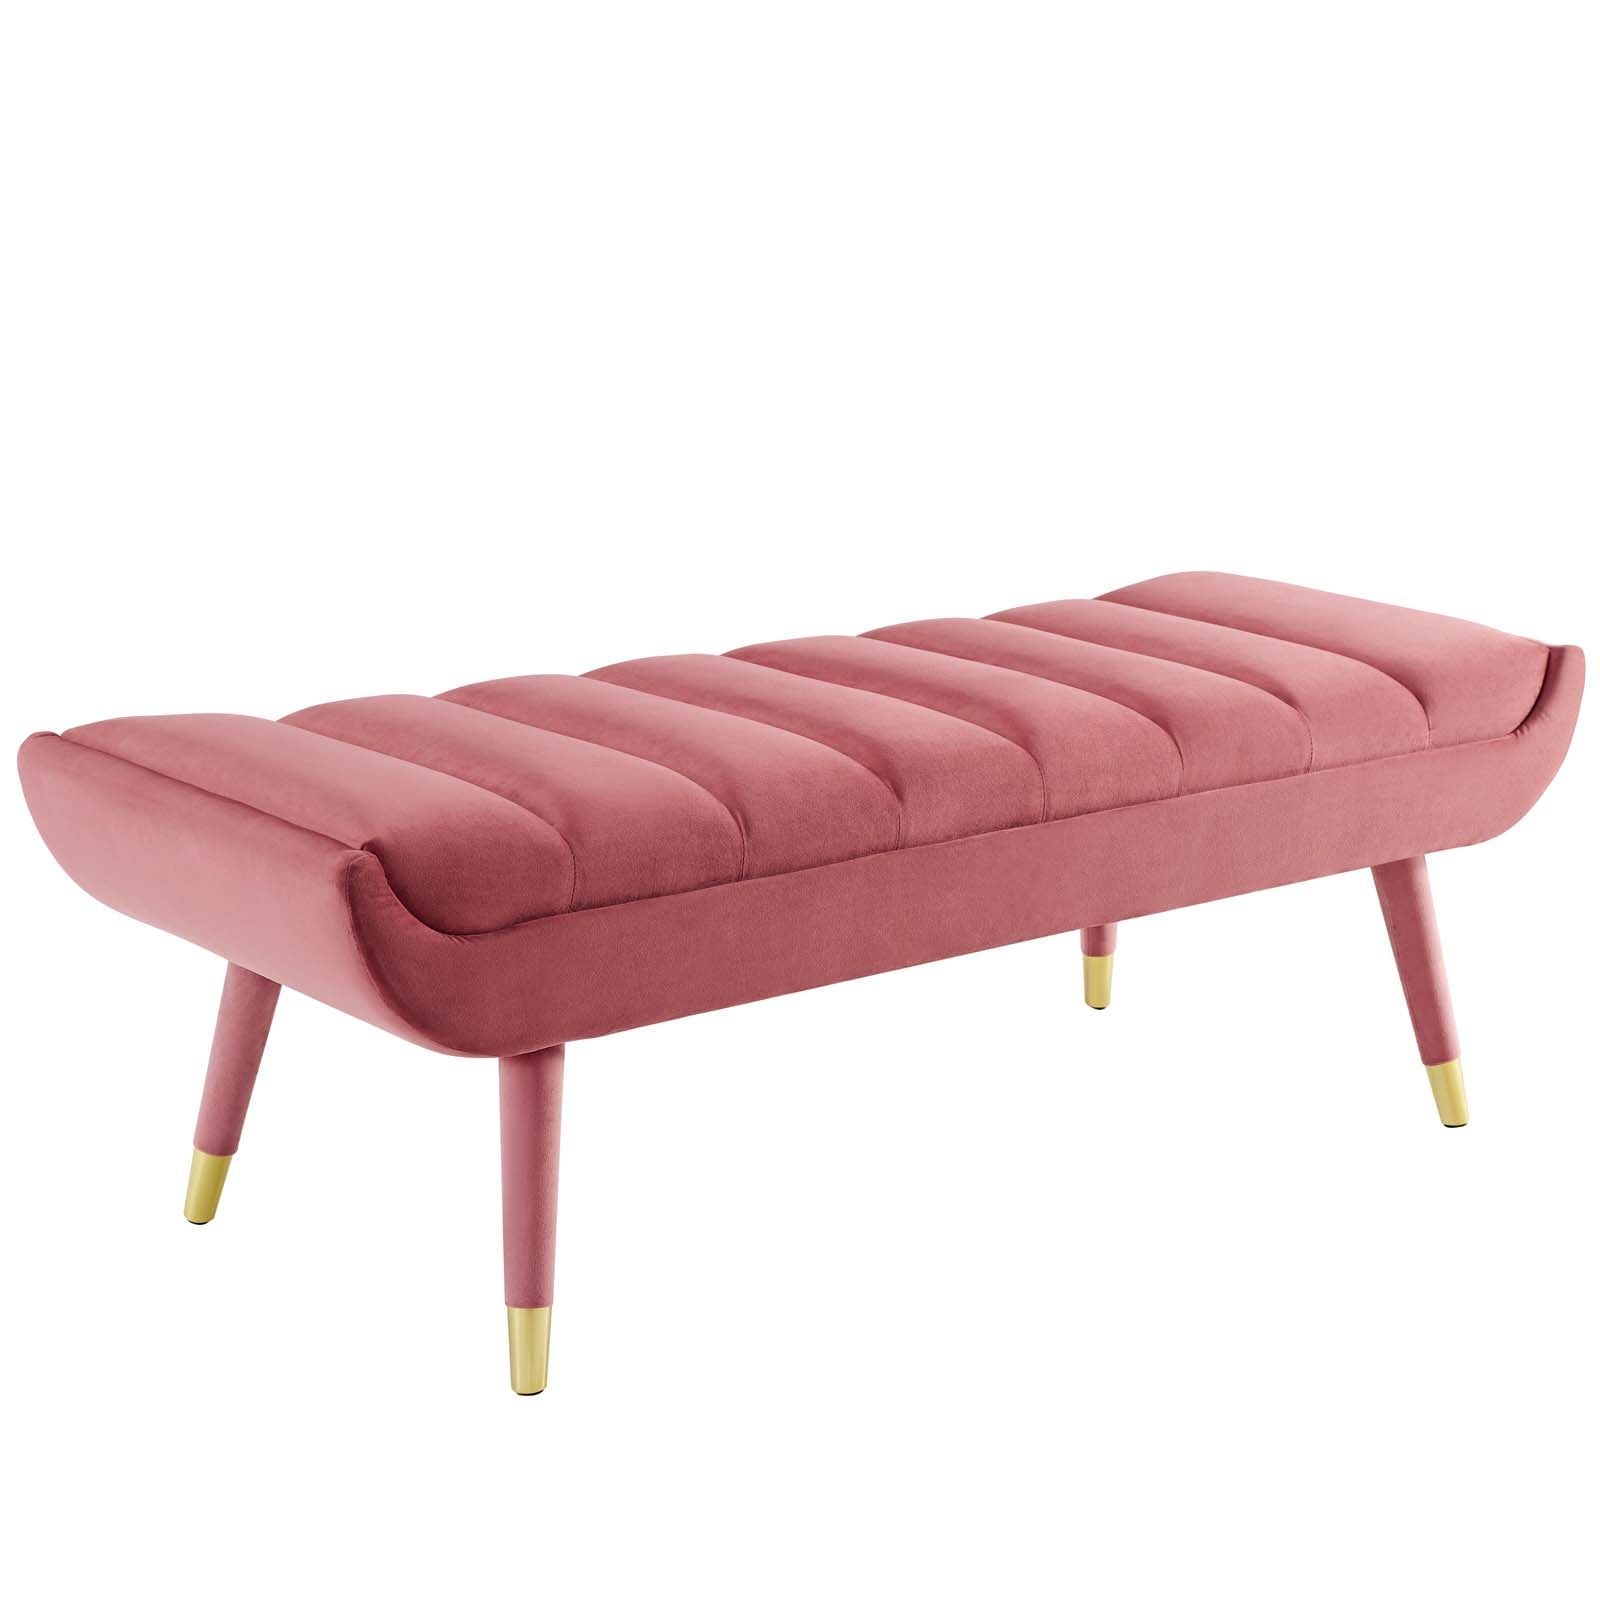 Guess Channel Tufted Performance Velvet Accent Bench - East Shore Modern Home Furnishings